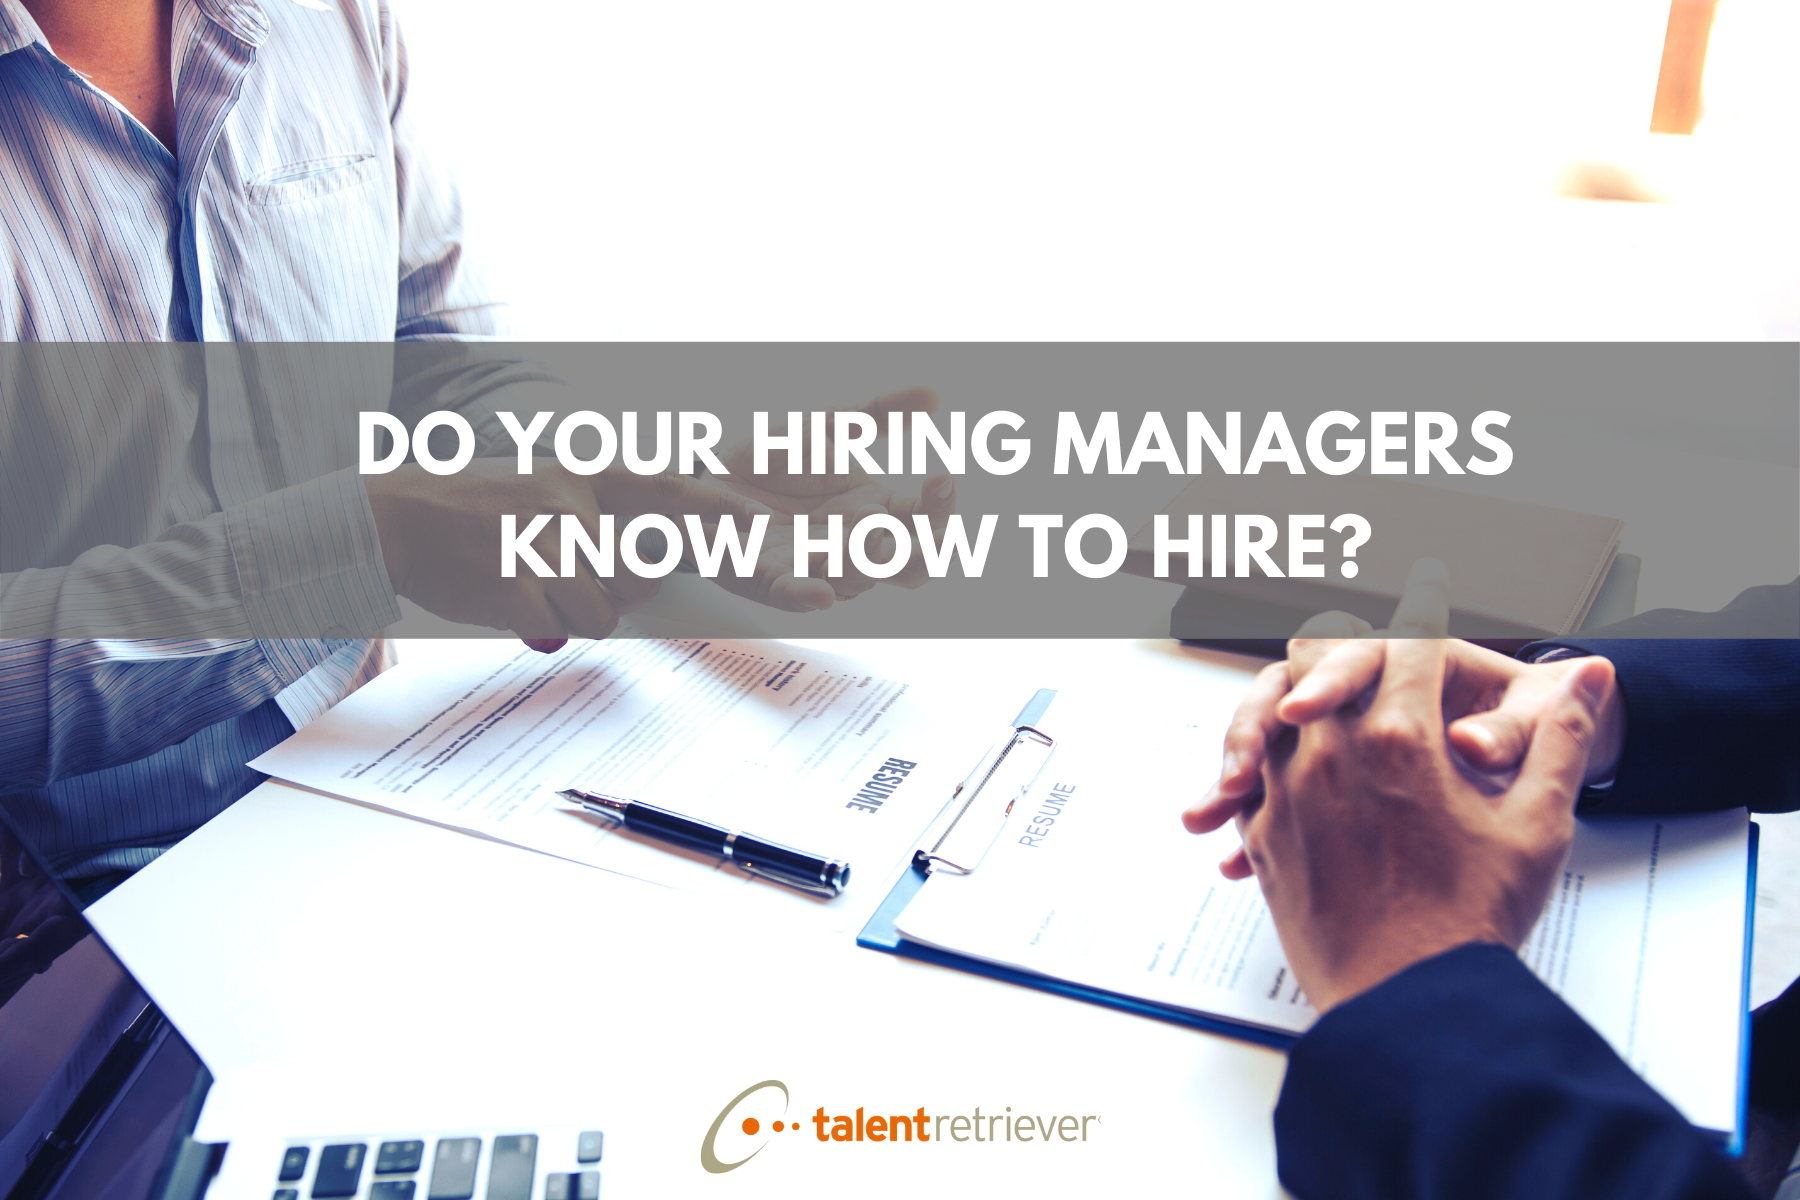 Do your hiring managers know how to hire